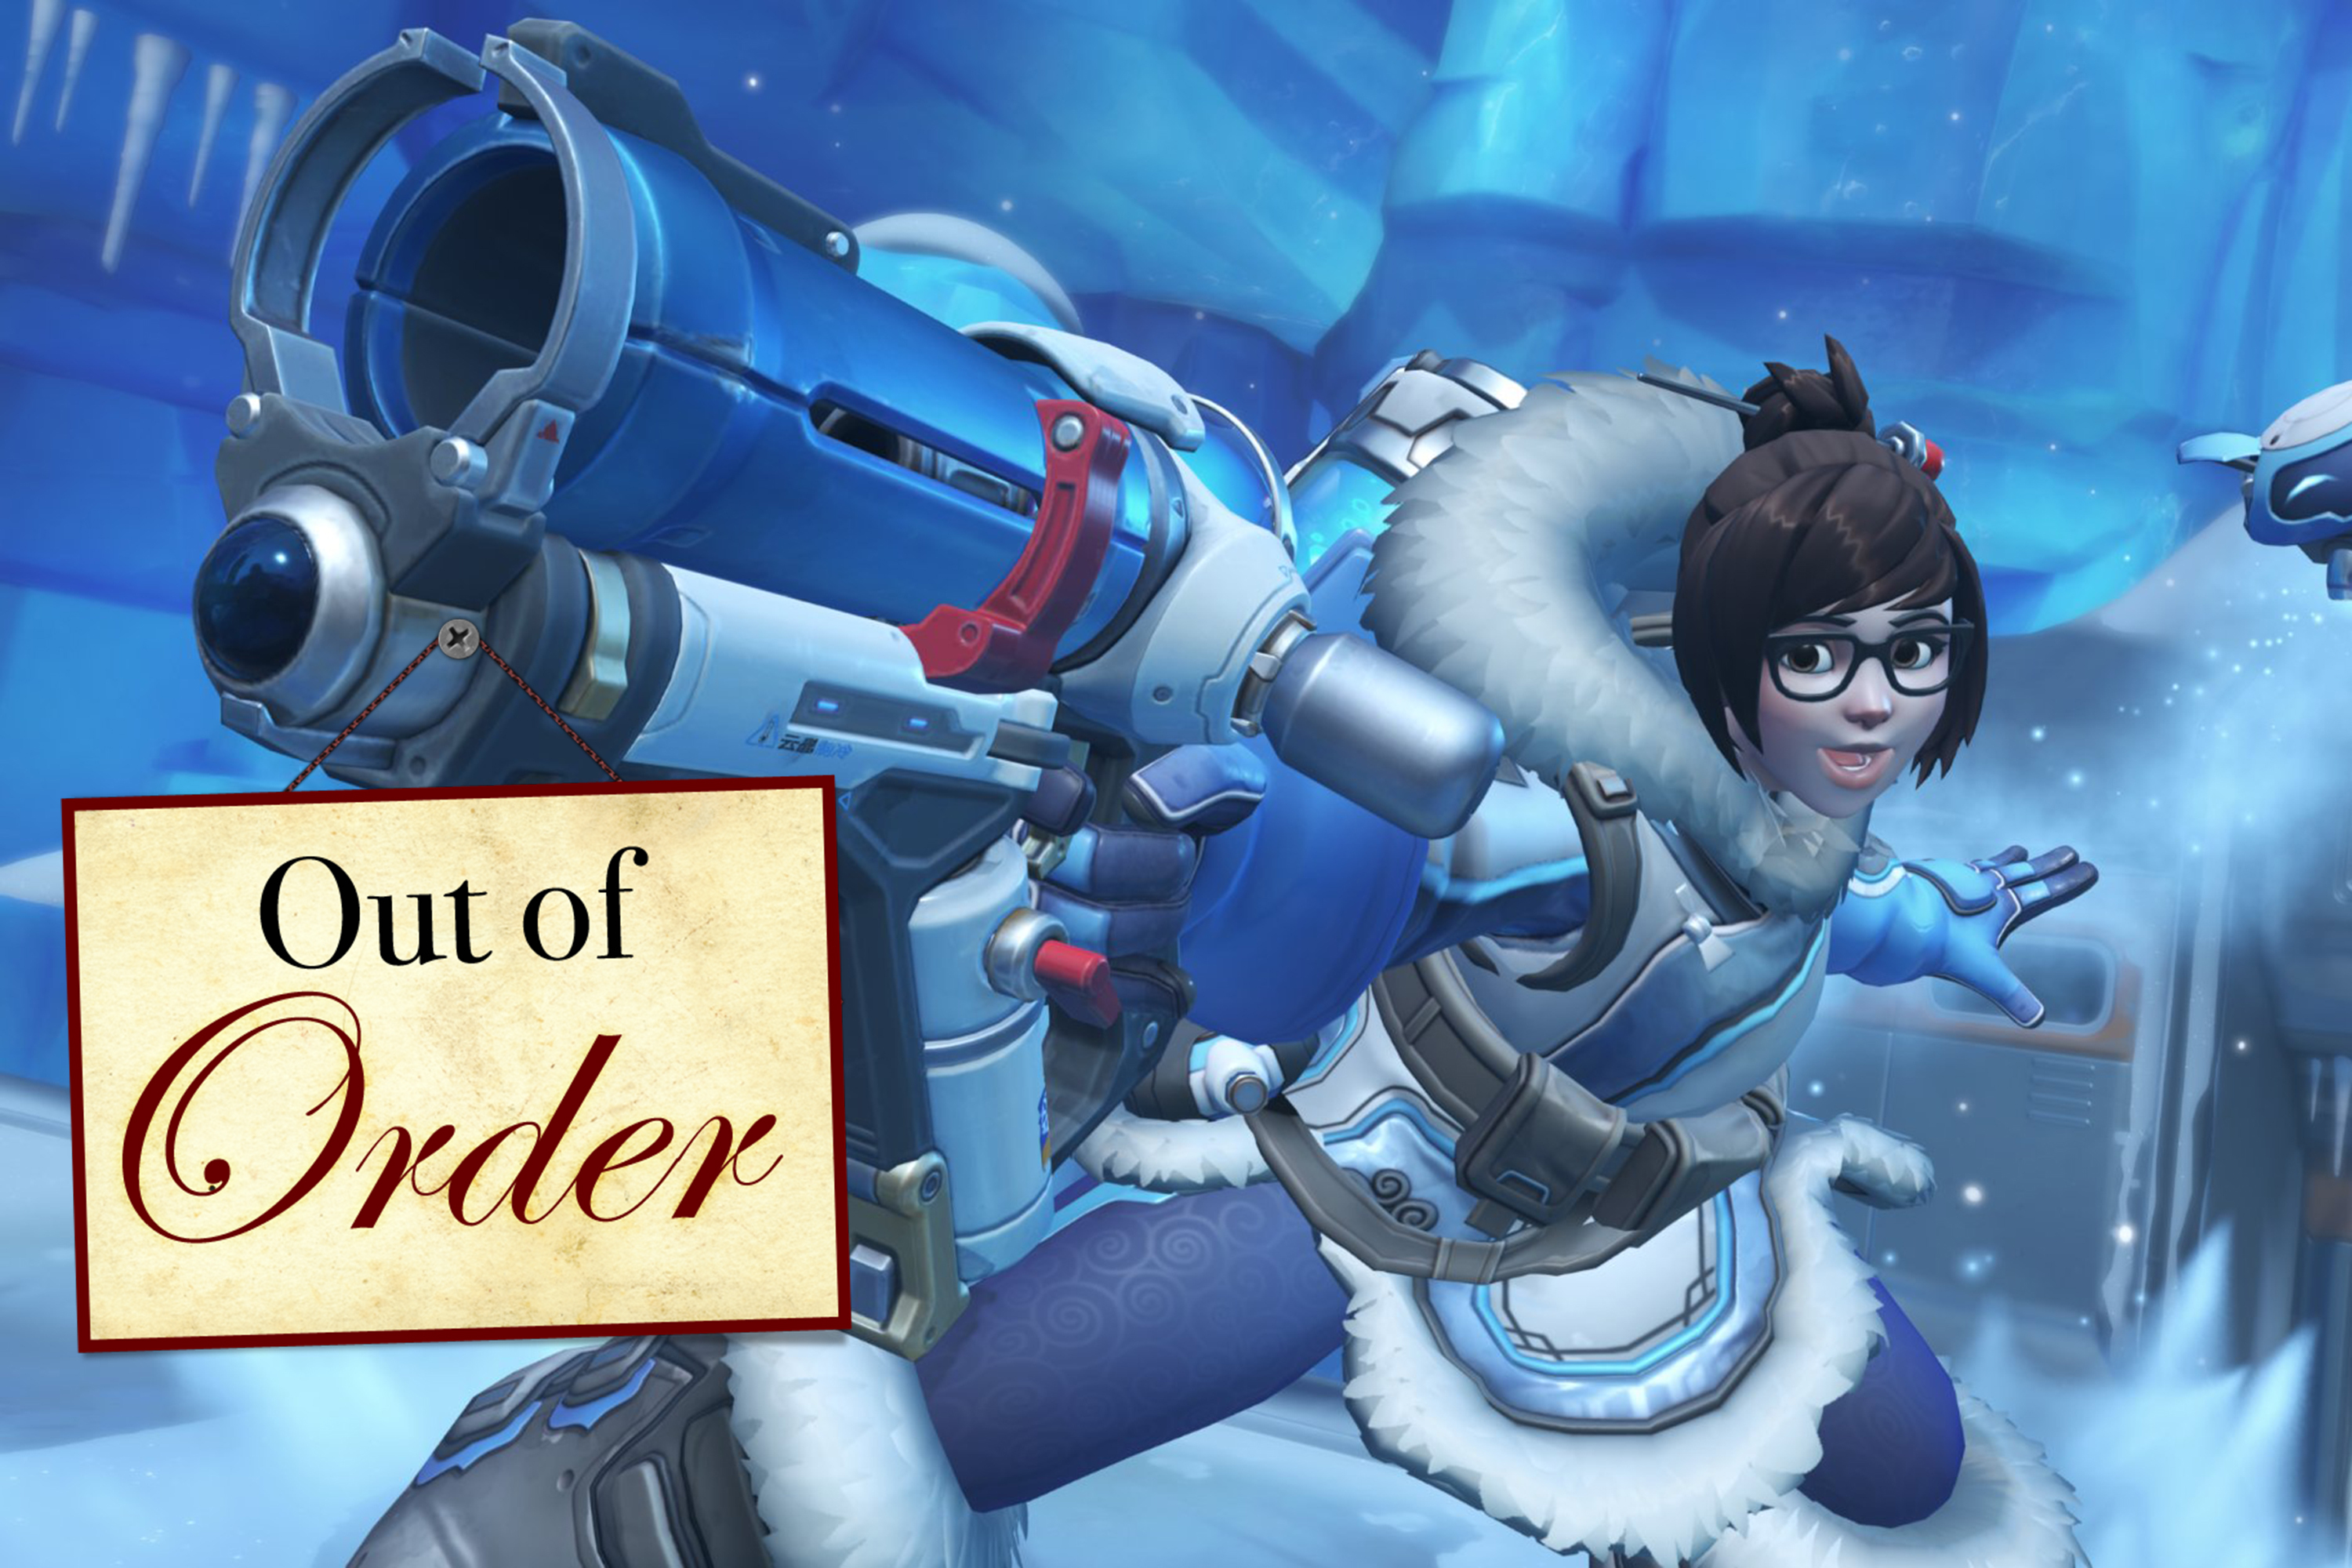 Overwatch 2’s Mei holding her ice gun straight at the camera. It’s got an “out of order” weapon charm.